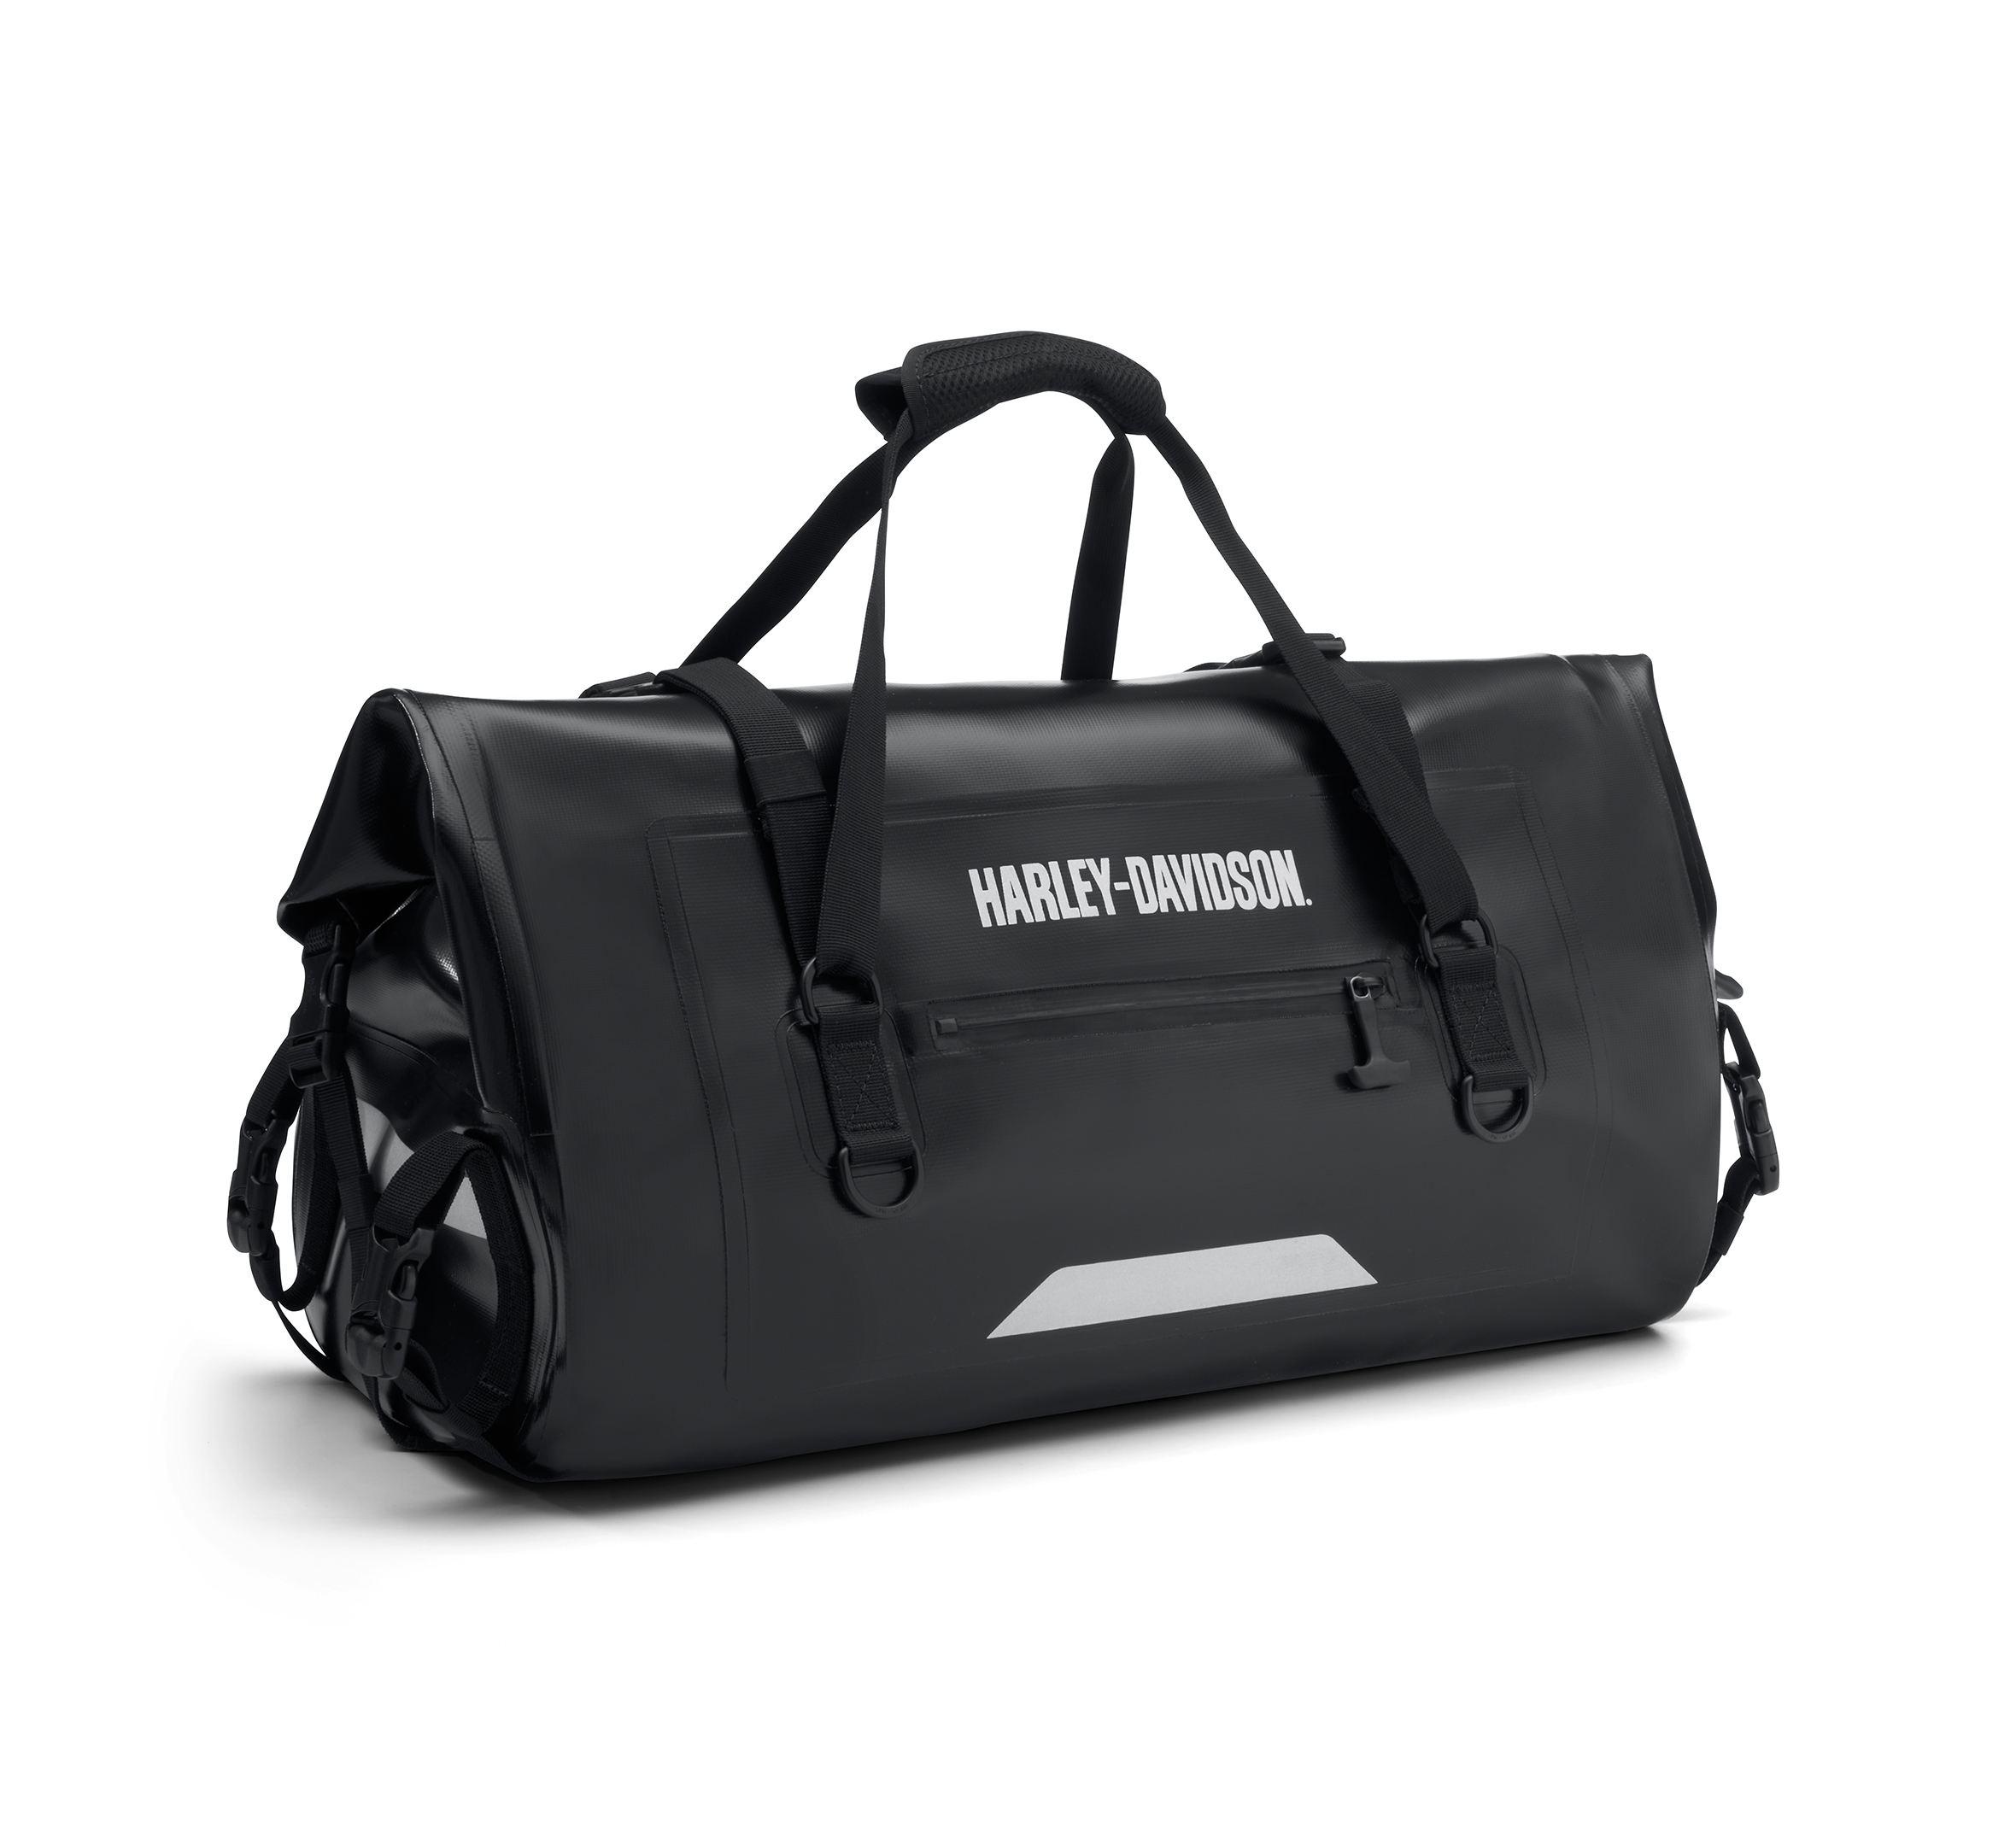 Duffel Bags & Hold All Bags, 30 - 95 Litre Bags